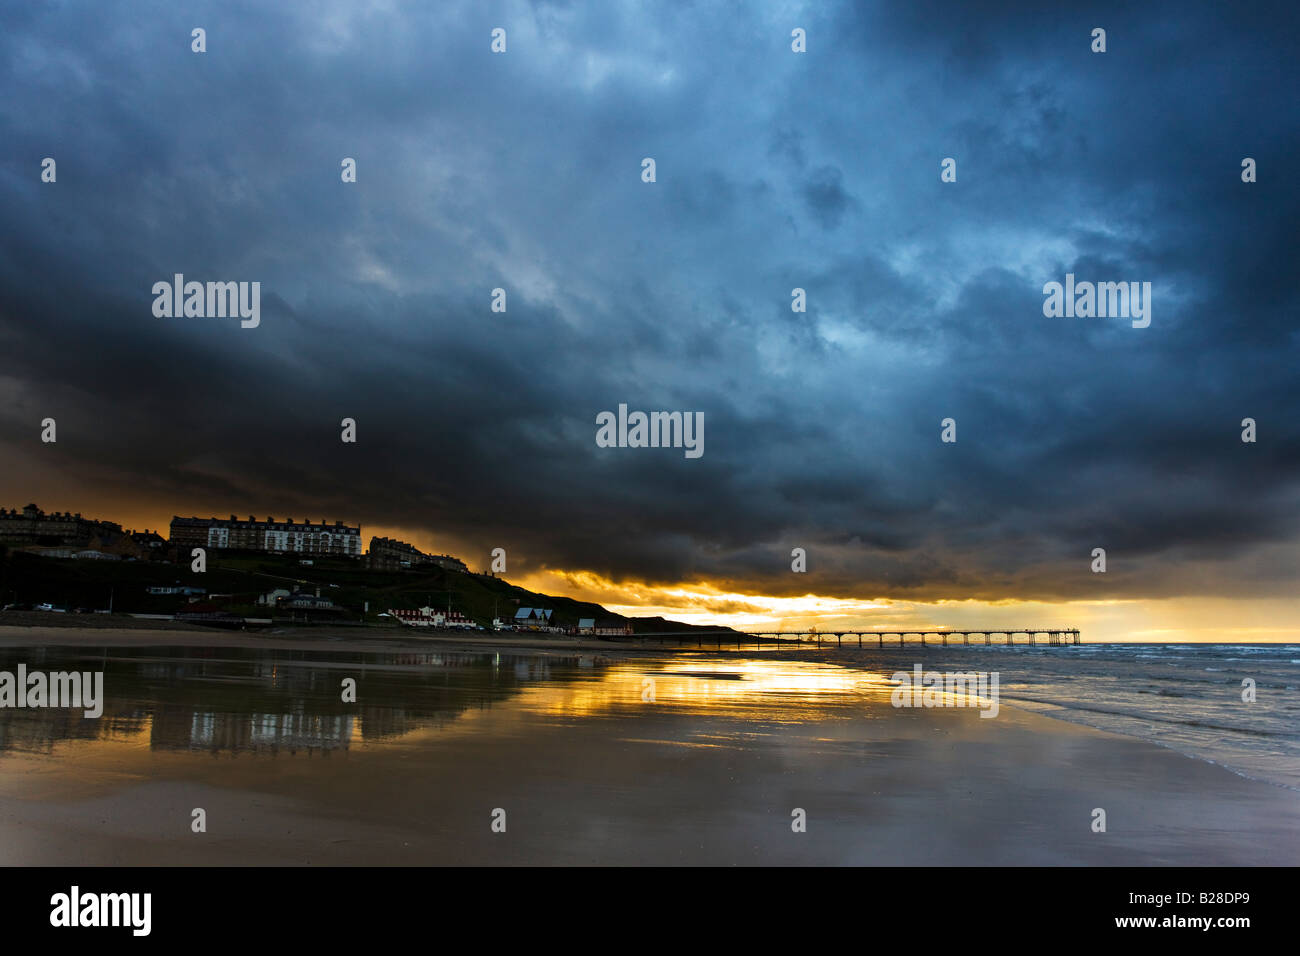 Stormy sky at low tide Saltburn Cleveland Stock Photo